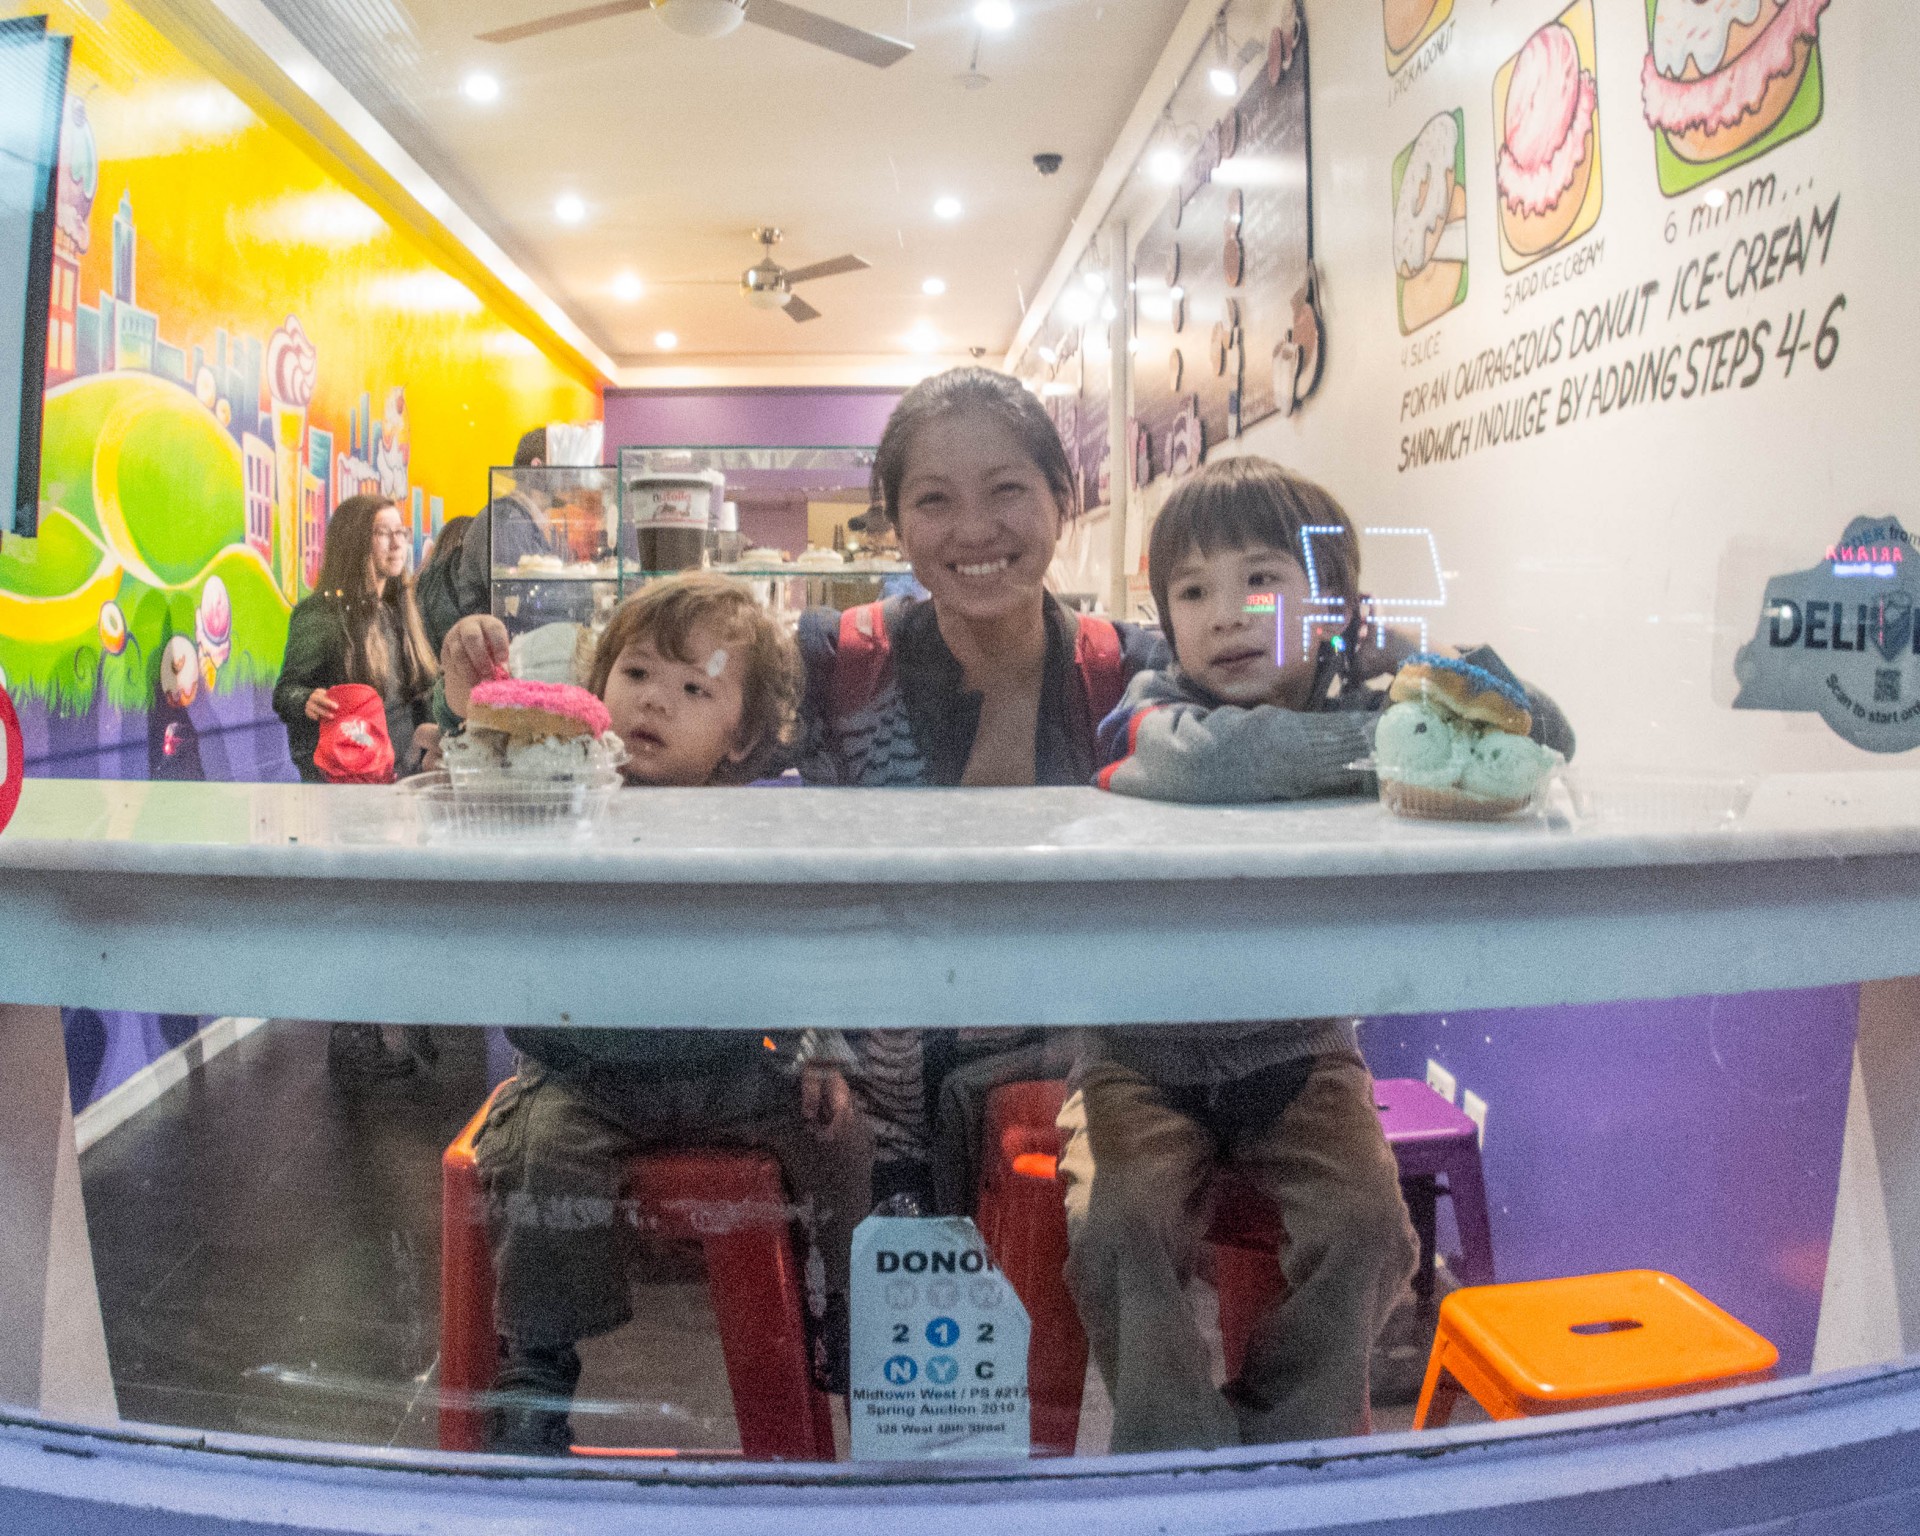 A mother and two young boys smile through the window of a bakery